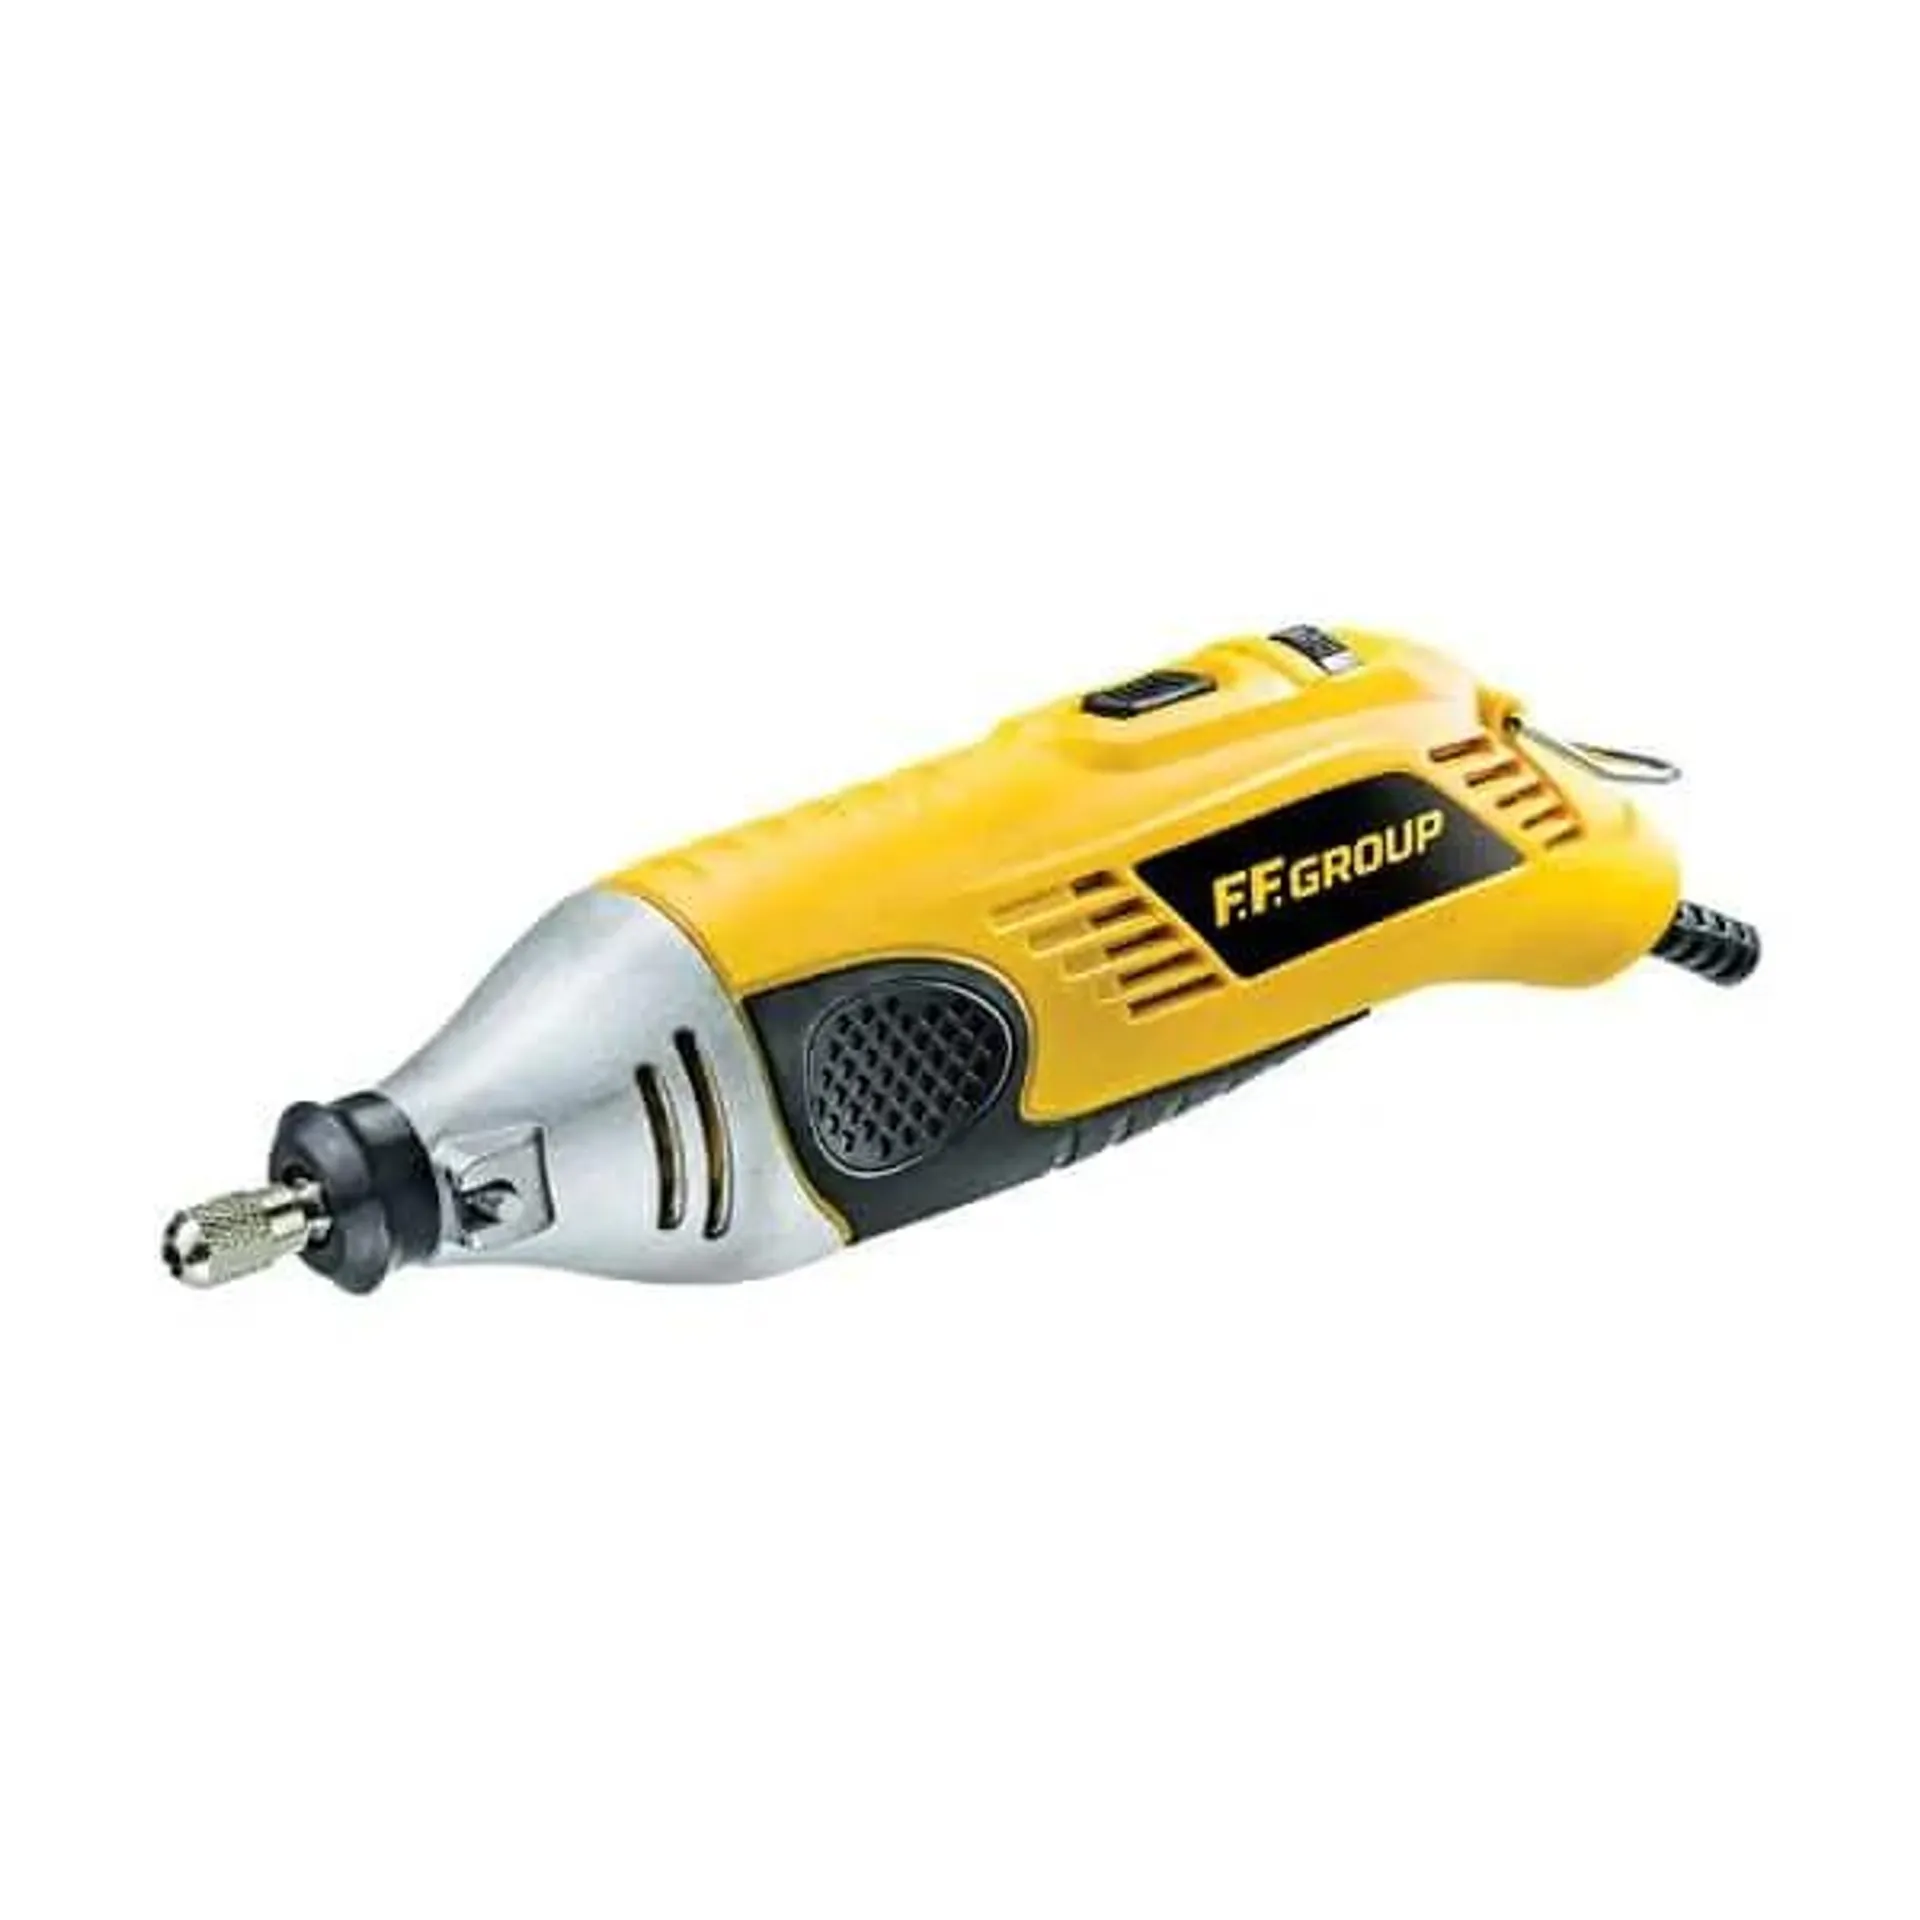 SMALL ROTARY TOOL SRT 180 EASY 180W FF GROUP